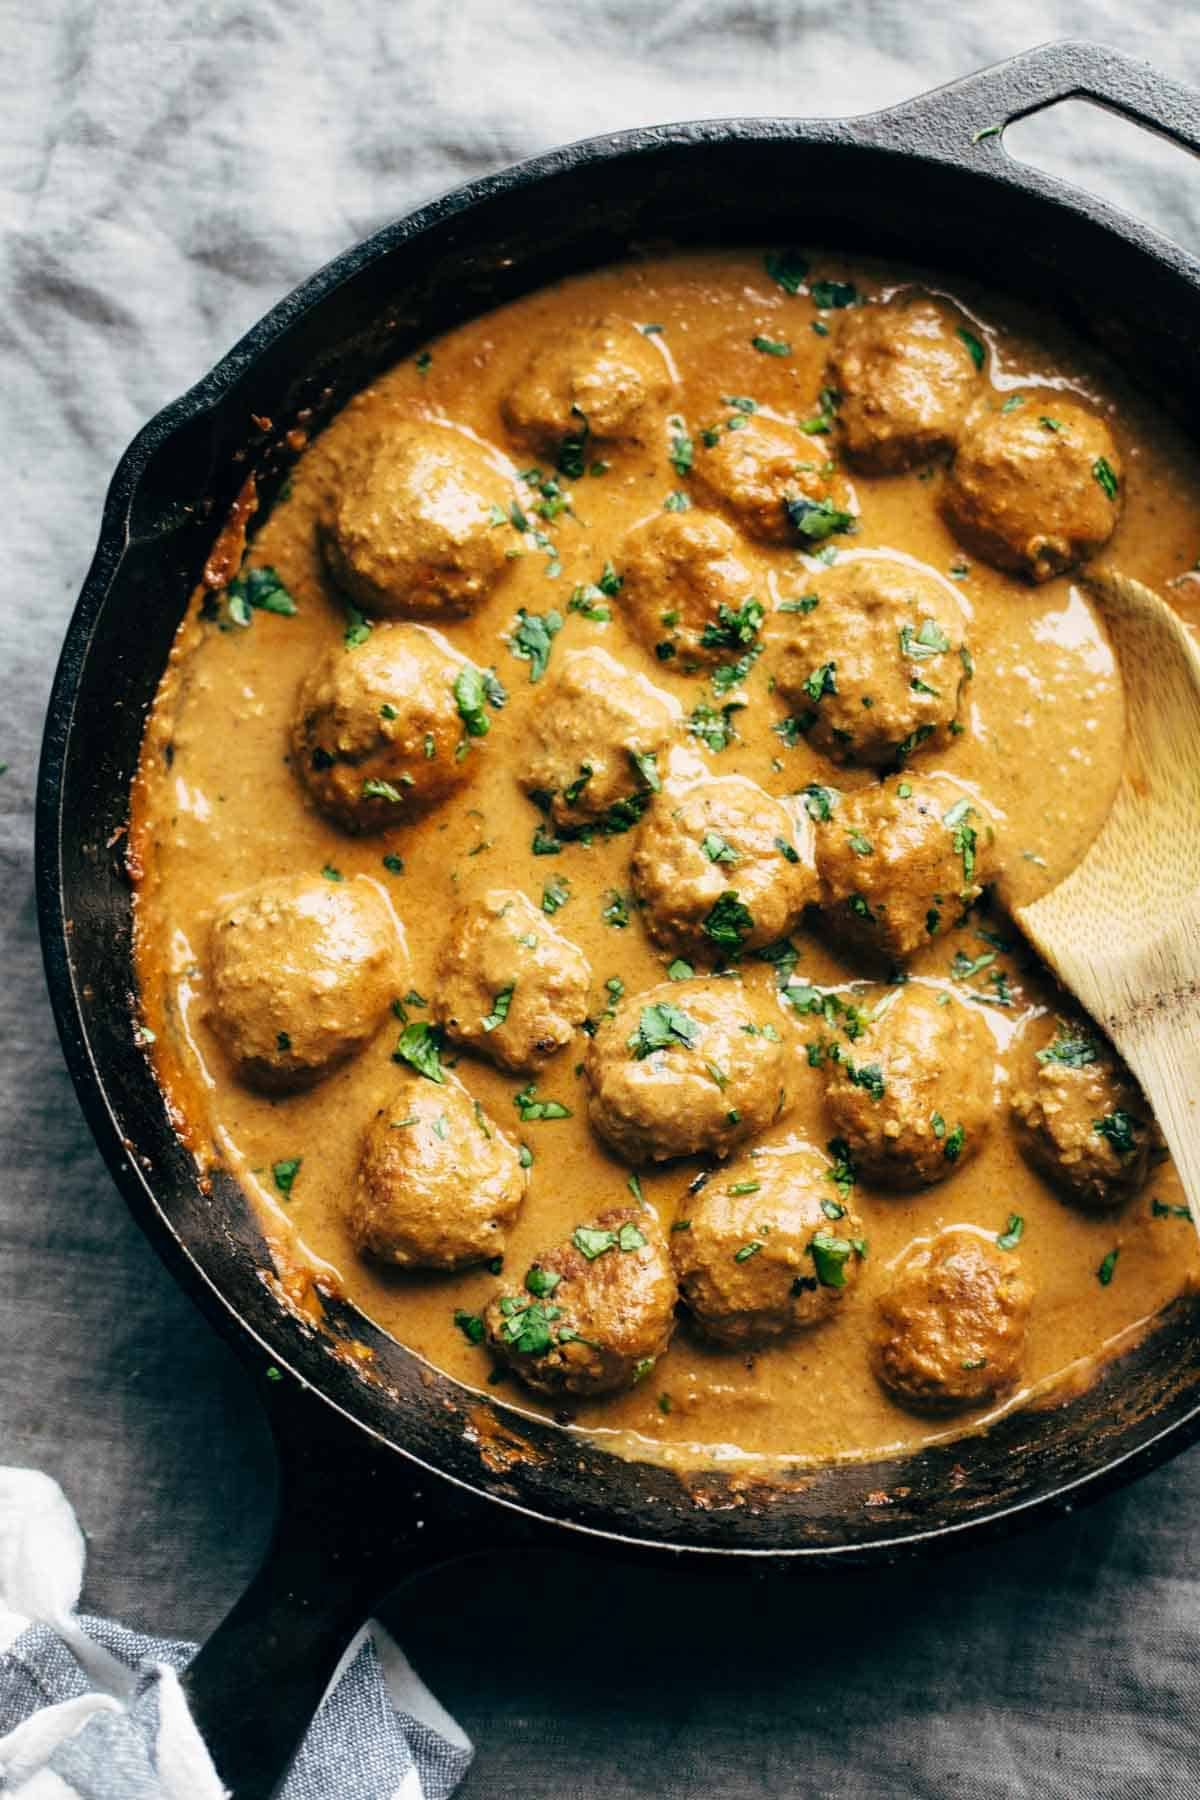 ON a light gray cloth is a cast iron skillet filled with a tomato sauce and meatballs. A wooden spoon is stirring to the right of the pan